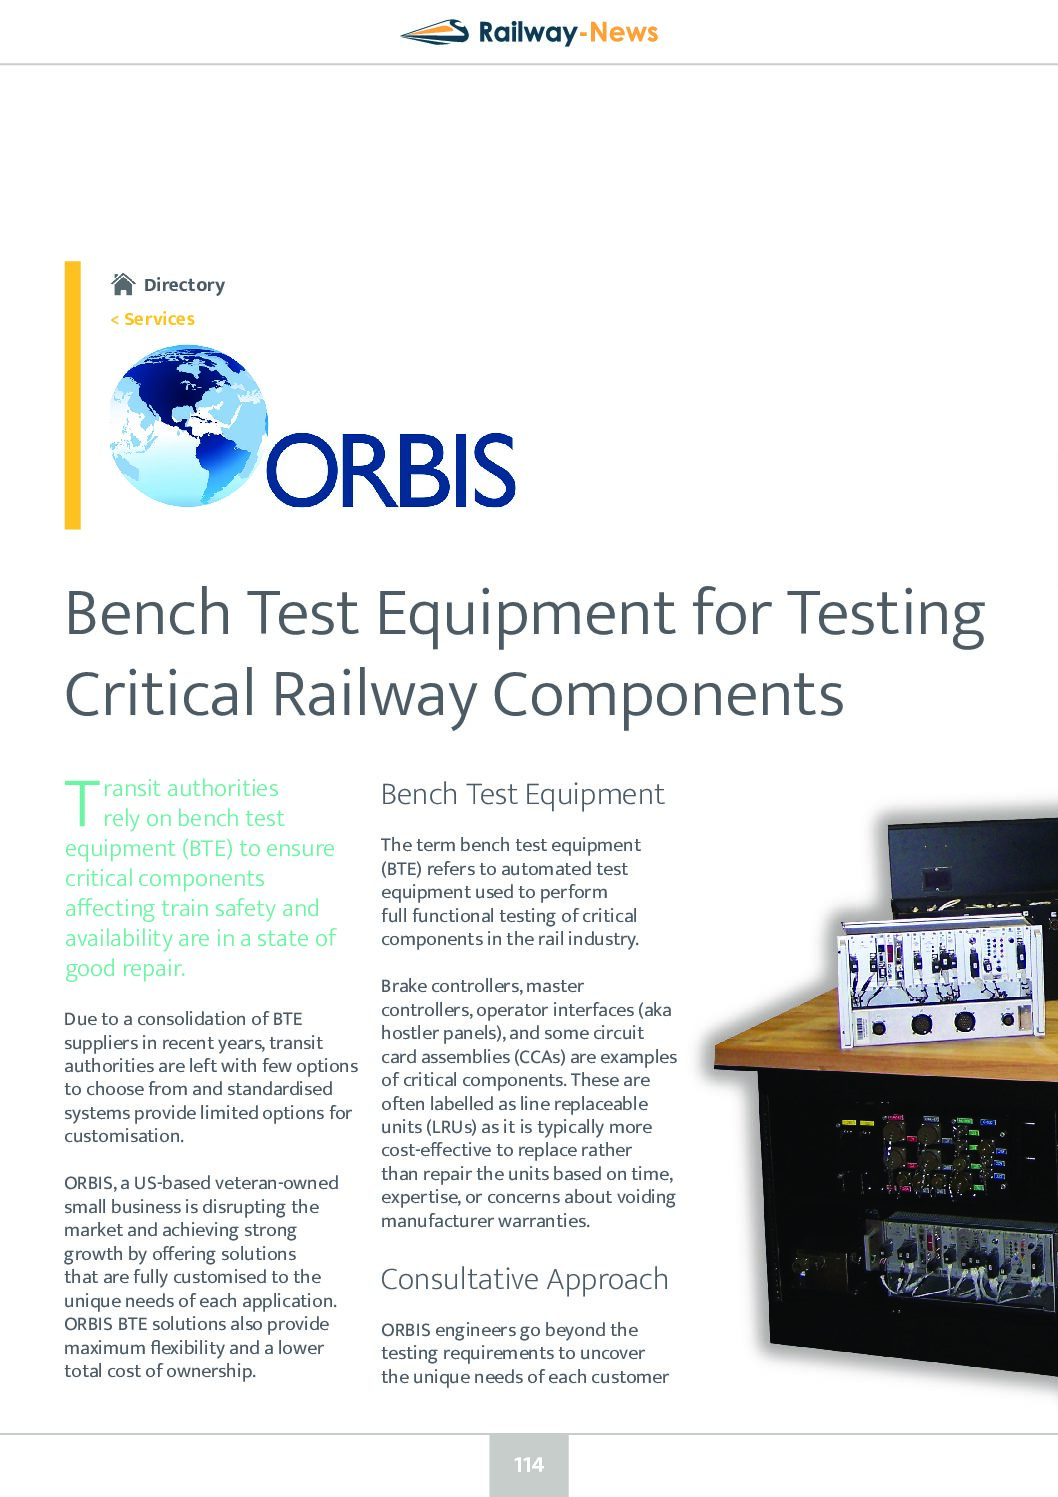 Bench Test Equipment for Testing Critical Railway Components